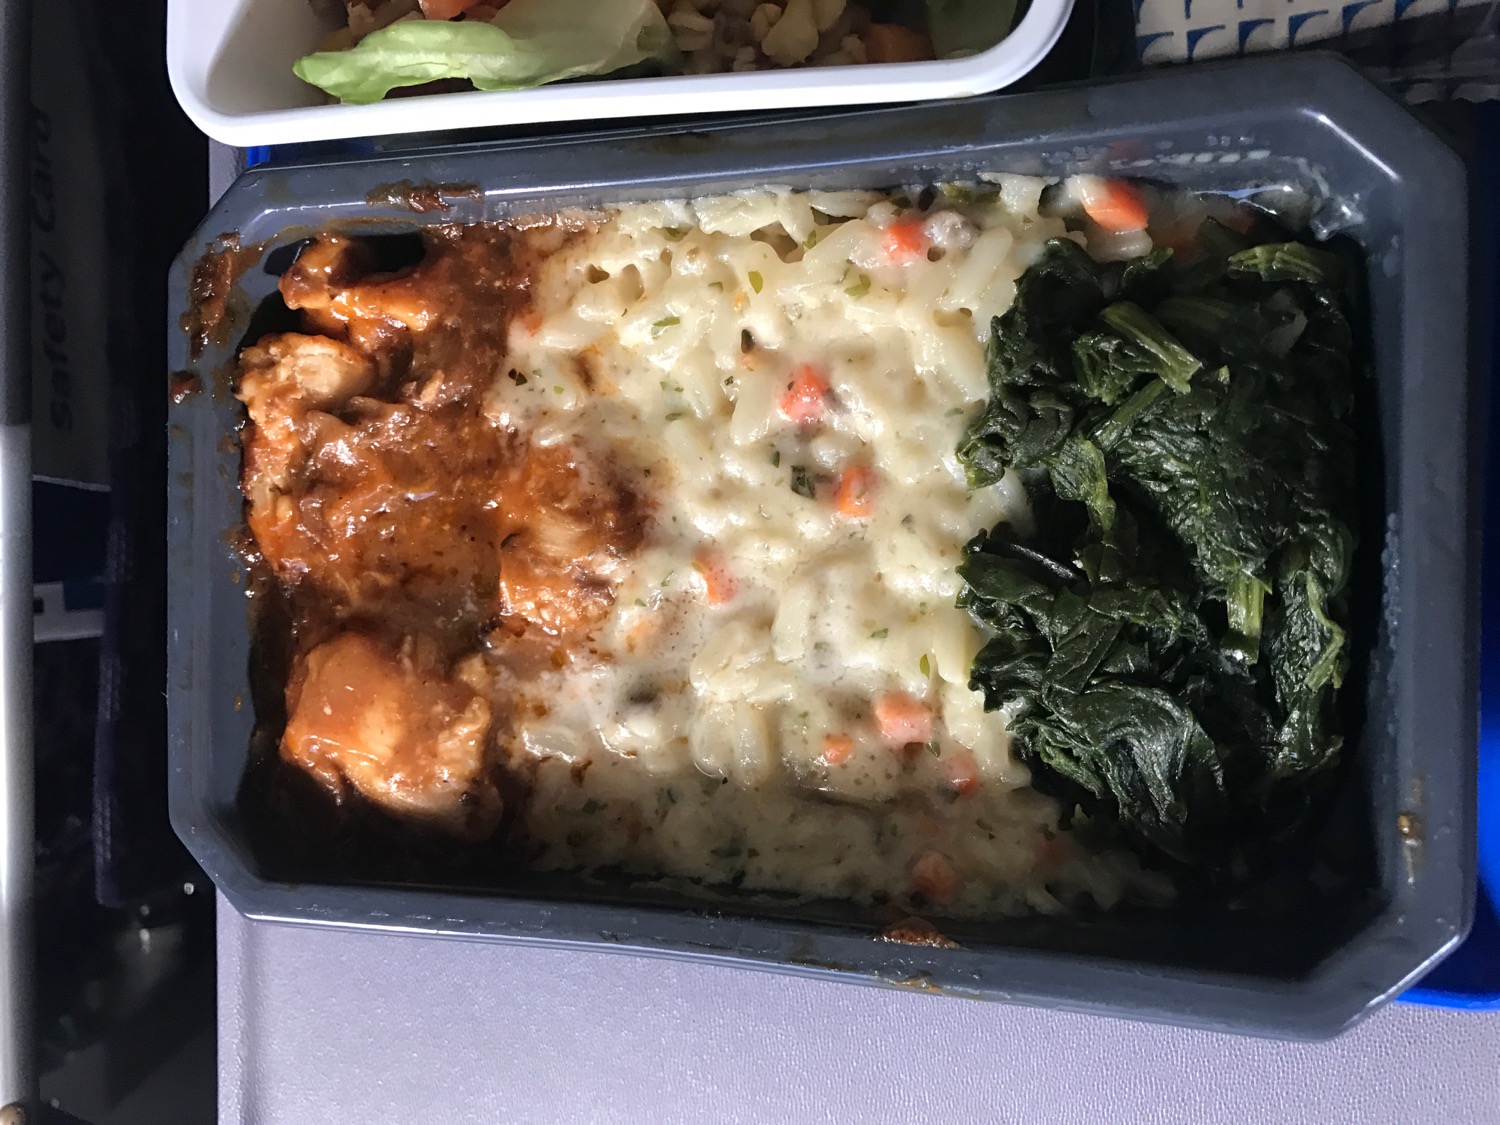 United AMS-IAH Economy Class Meal - 5